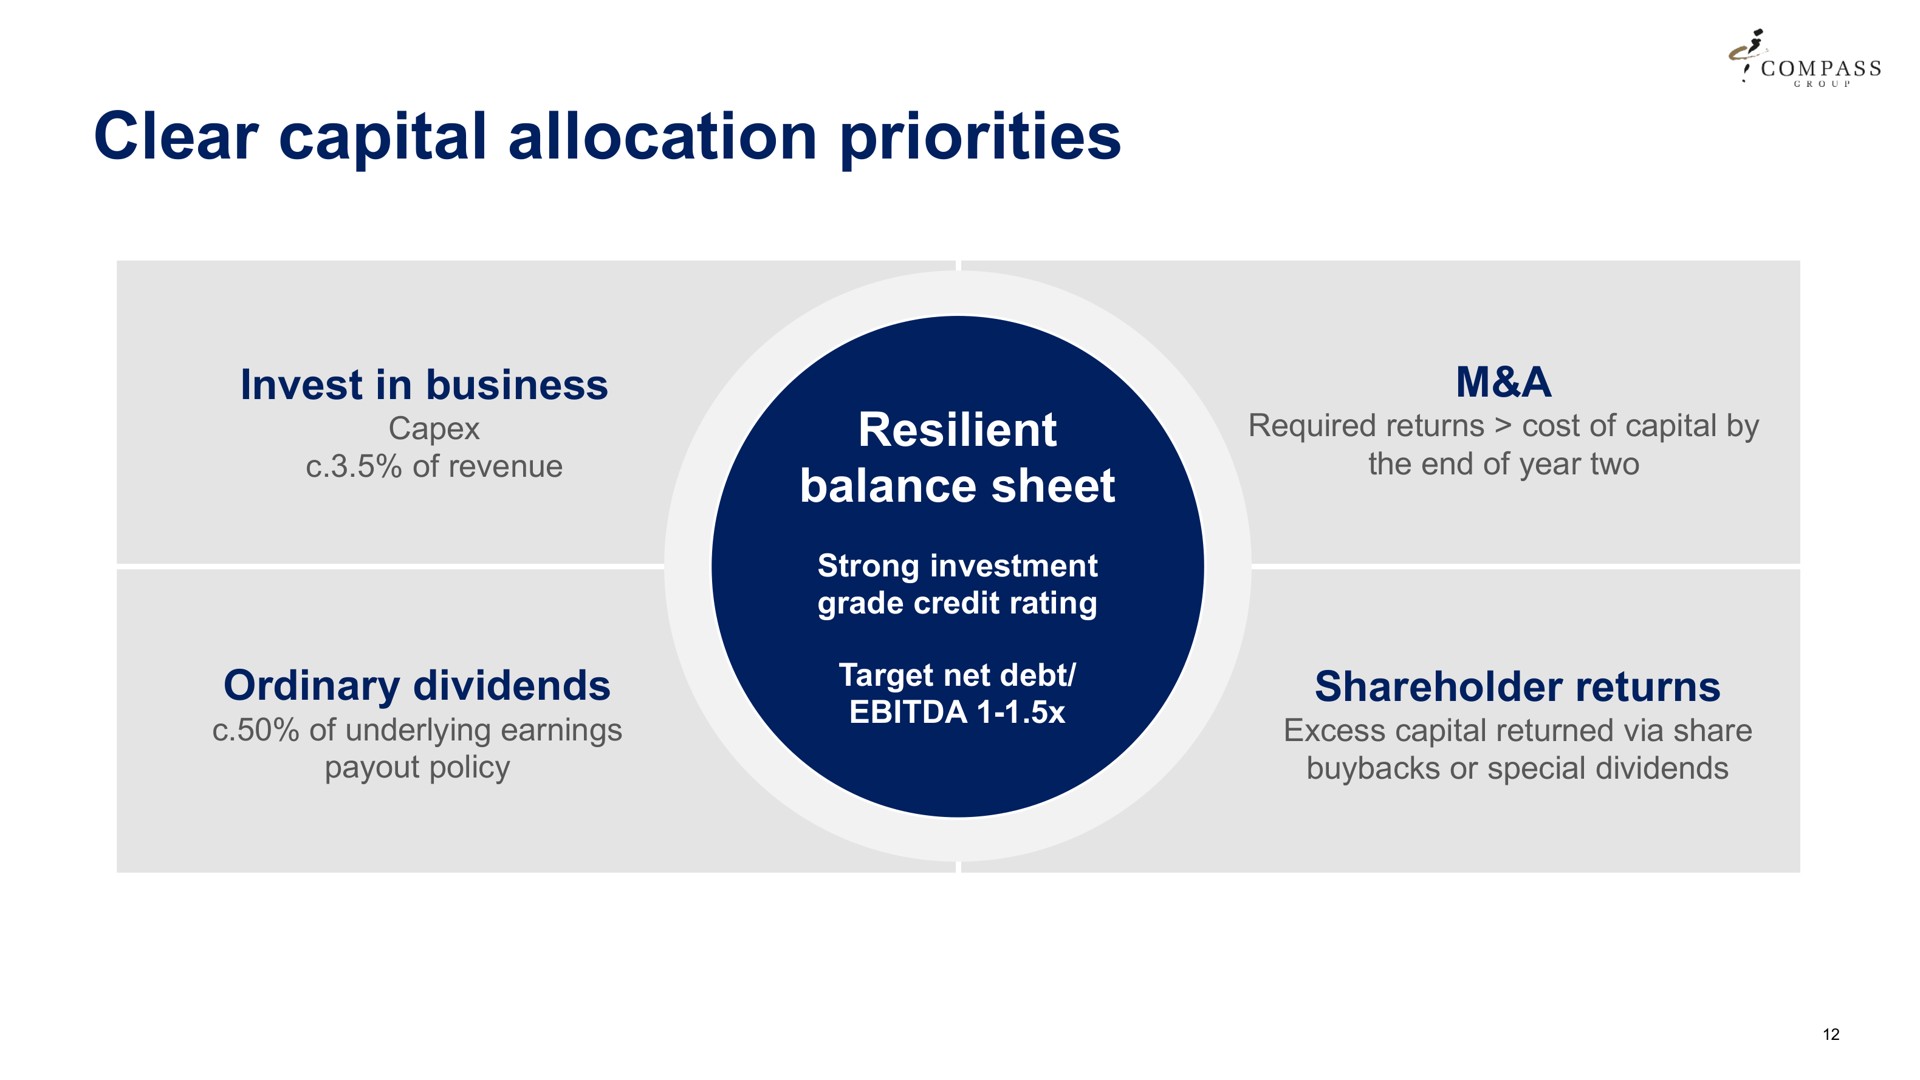 clear capital allocation priorities | Compass Group